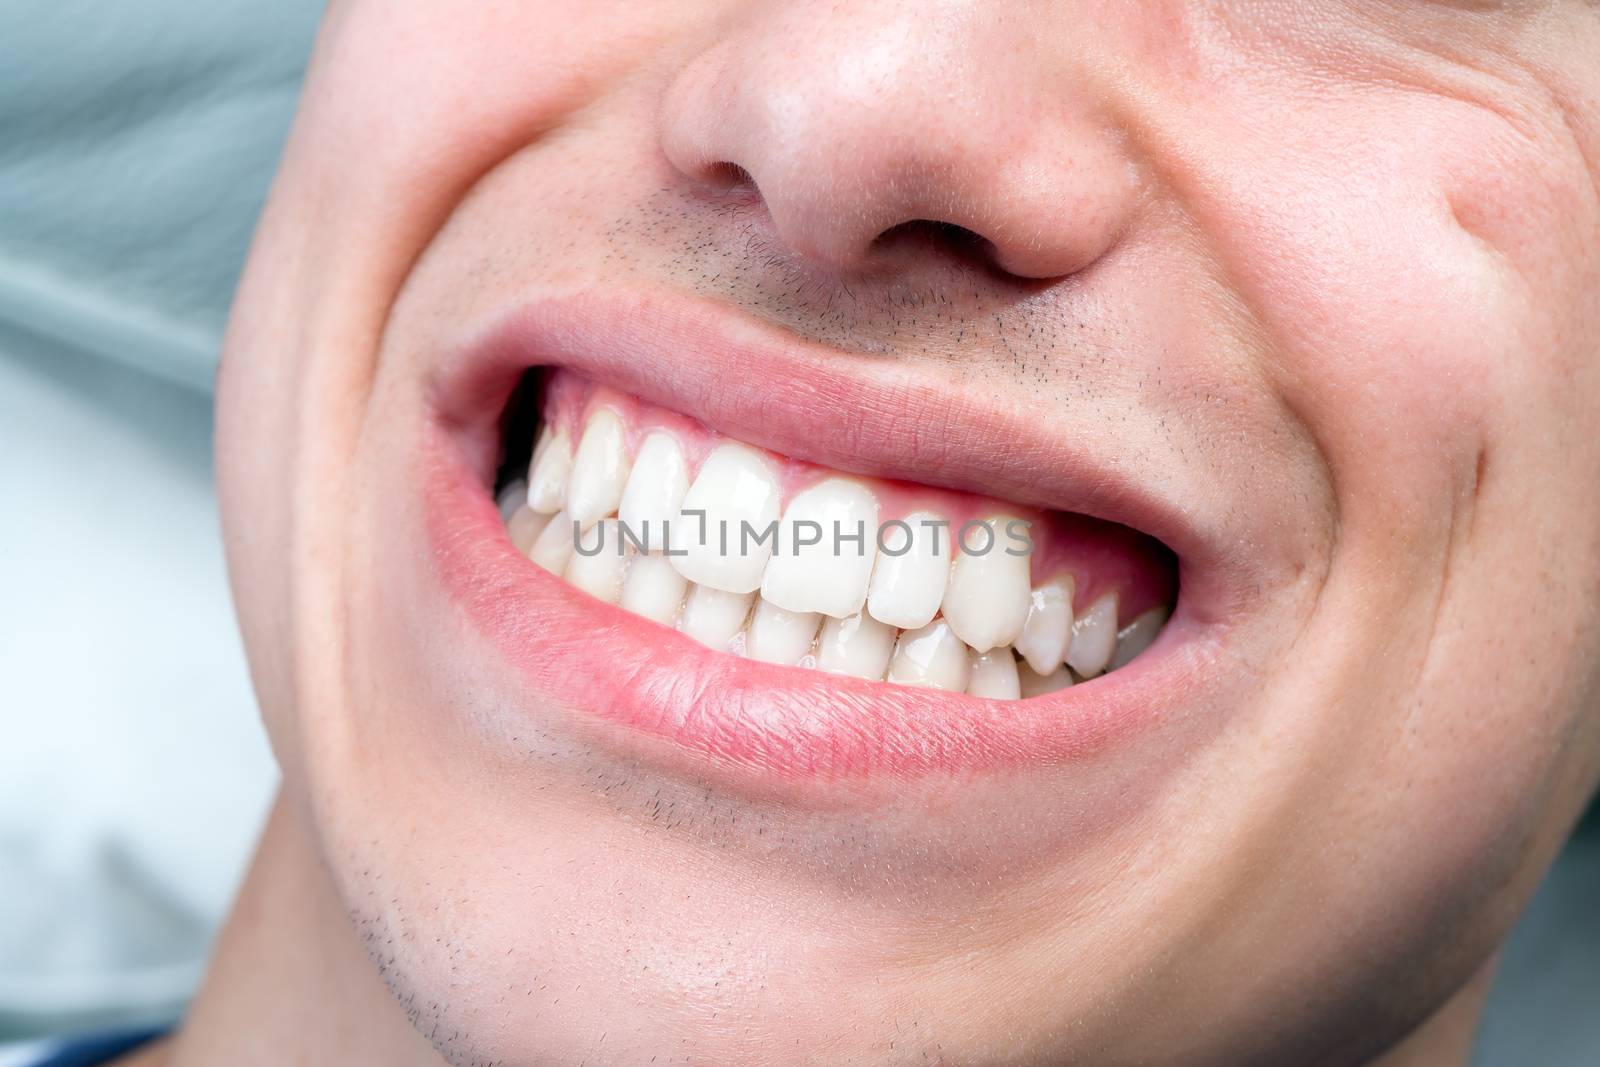 Extreme close up of human male mouth showing teeth. by karelnoppe